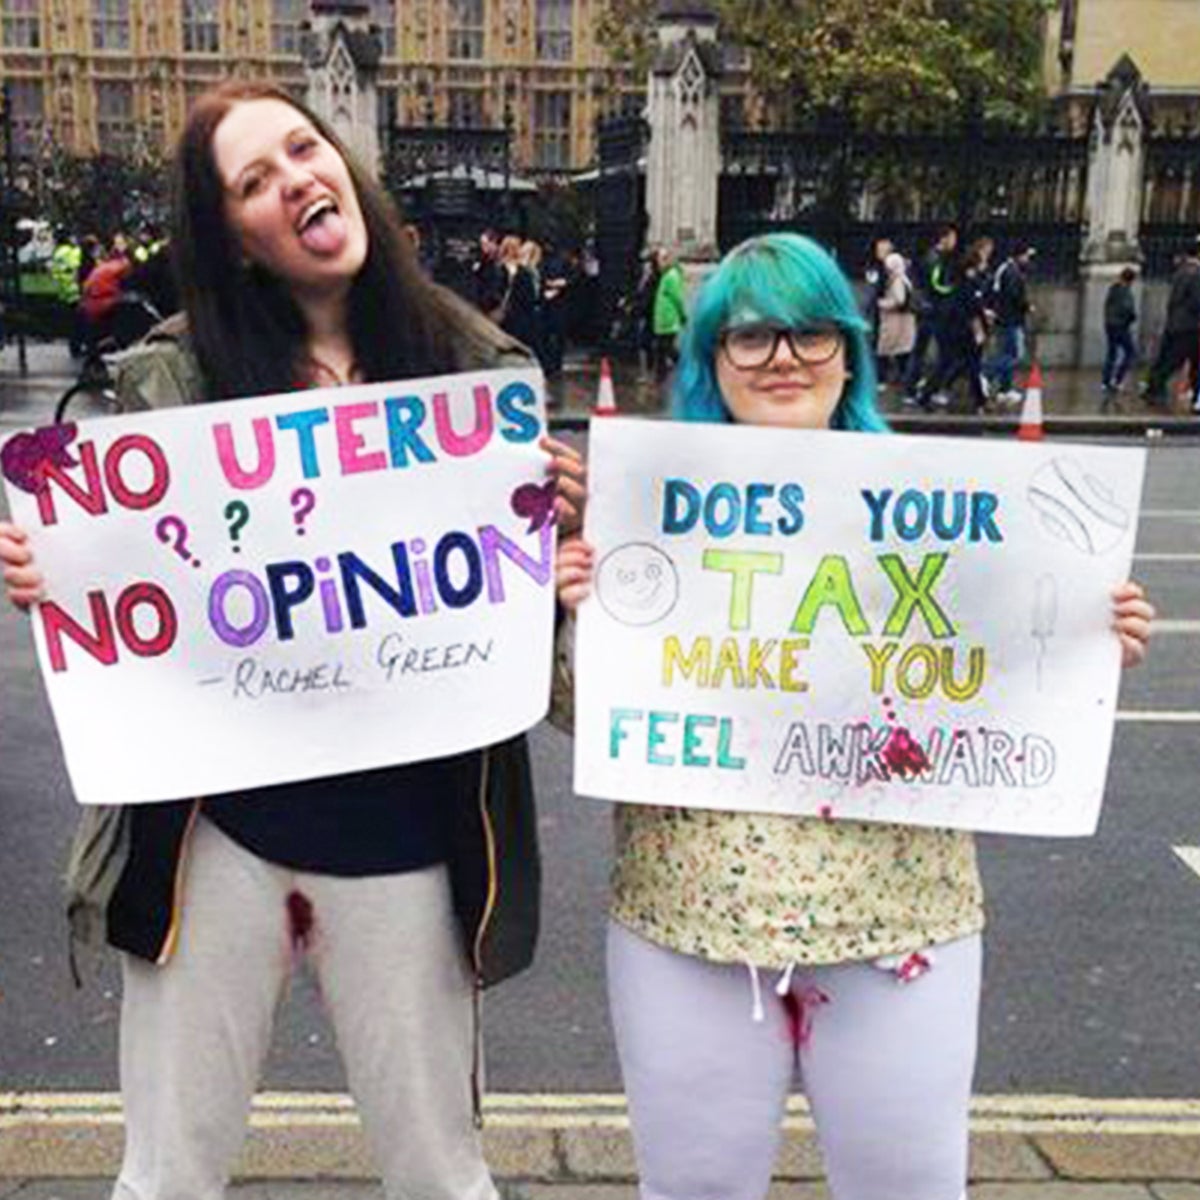 Does our period blood protest make you feel uncomfortable? That's